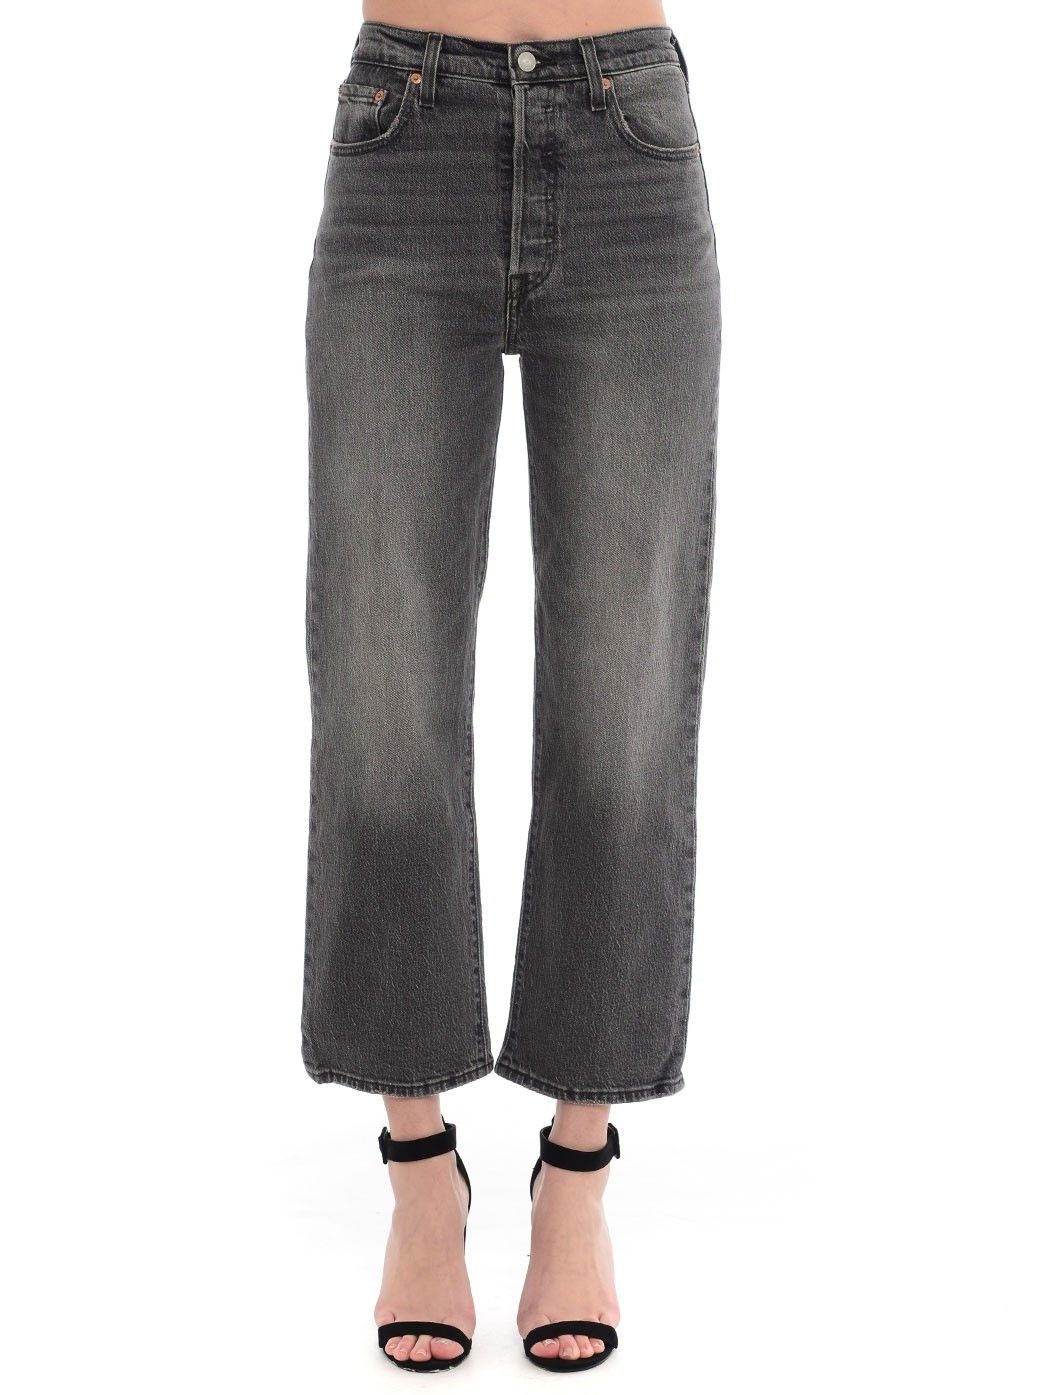  WOMENSWEAR,SPRING SUMMER COLLECTION  LEVI'S A72693